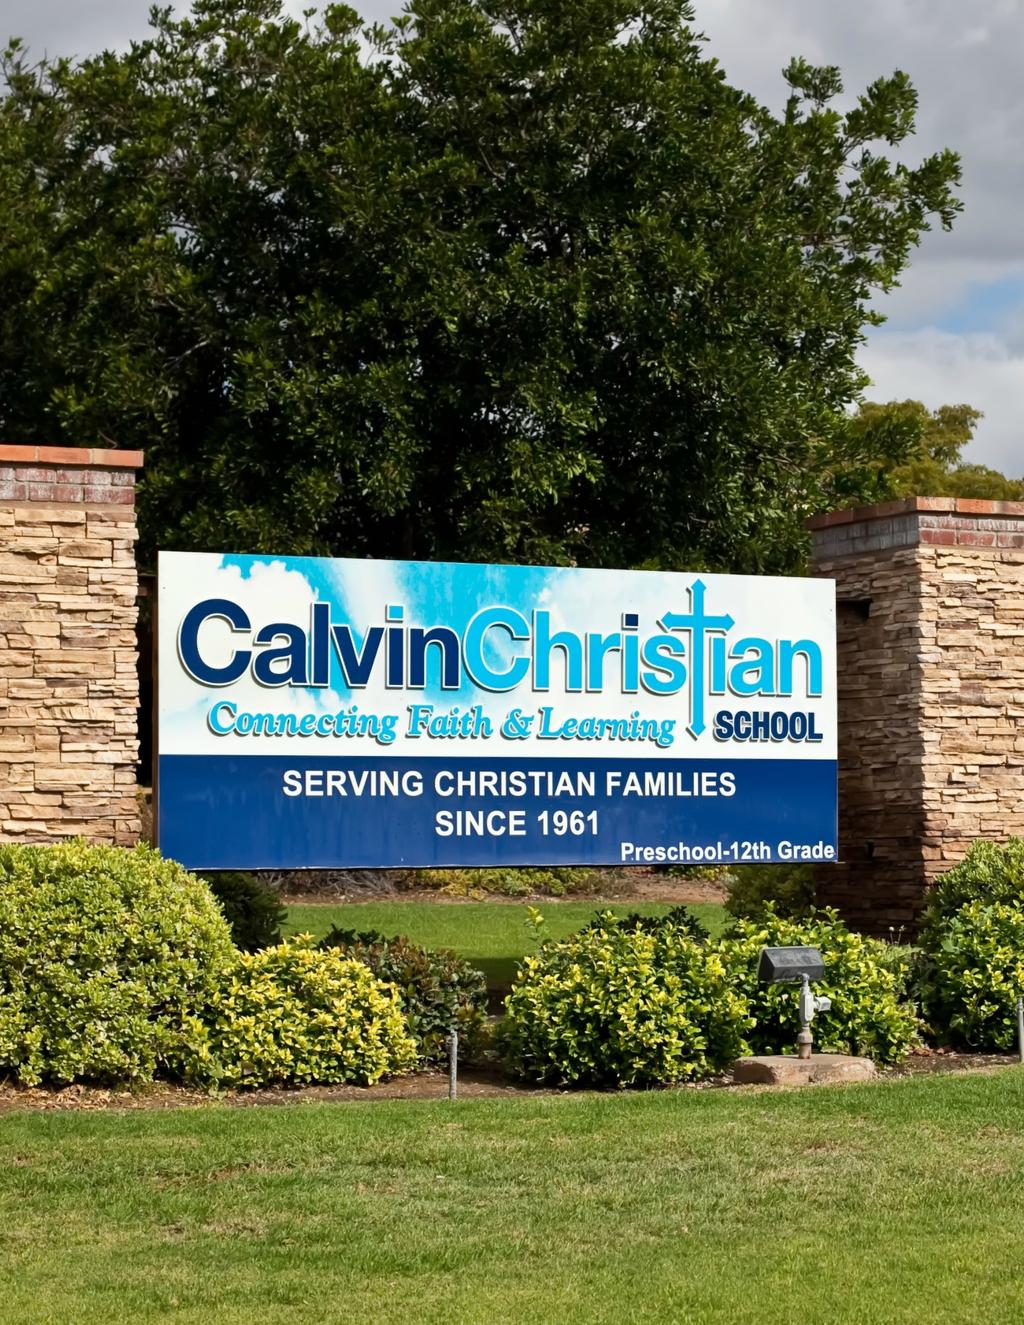 THE PROCESS of Candidacy Now that you have a better sense of what Calvin Christian School is all about, we d love to get connected with you. Submit the application found at: www.